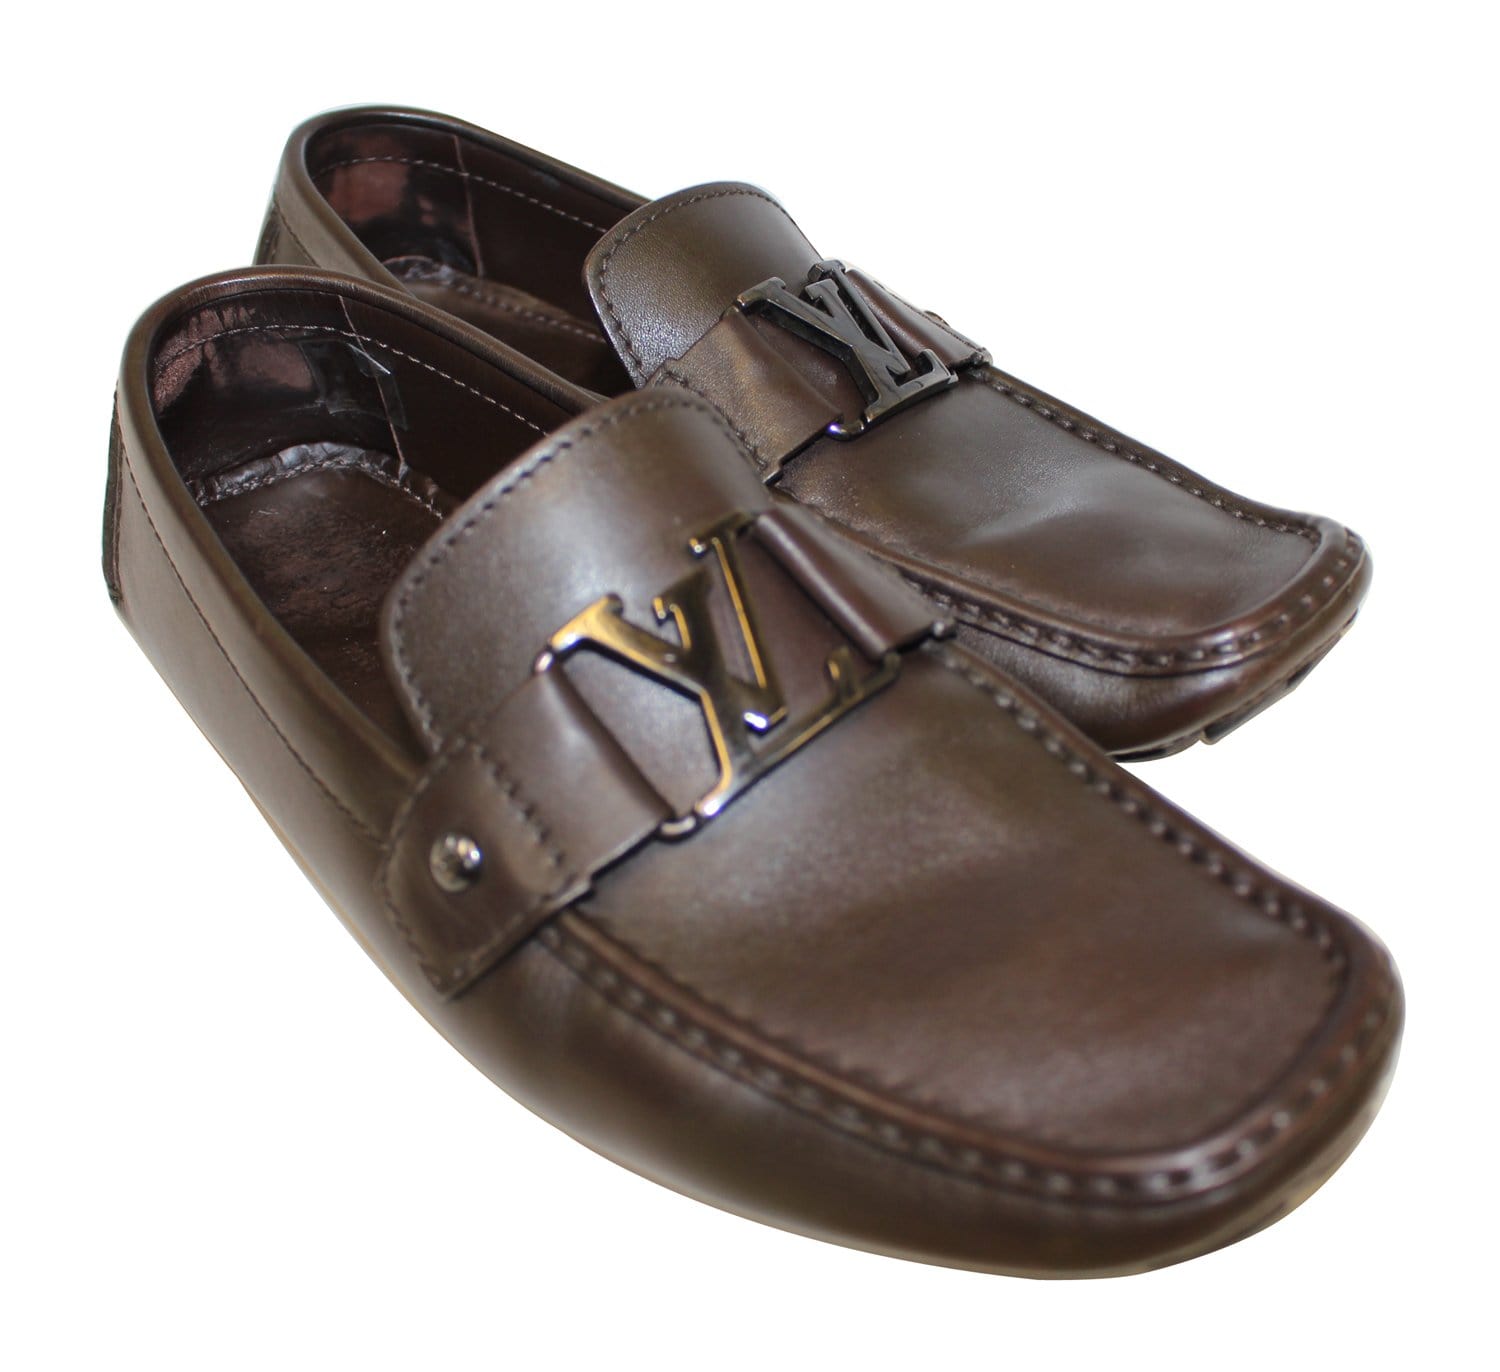 Louis Vuitton Monte Carlo moccasin brown leather 8 LV or 9 US 42 EUR FA0077